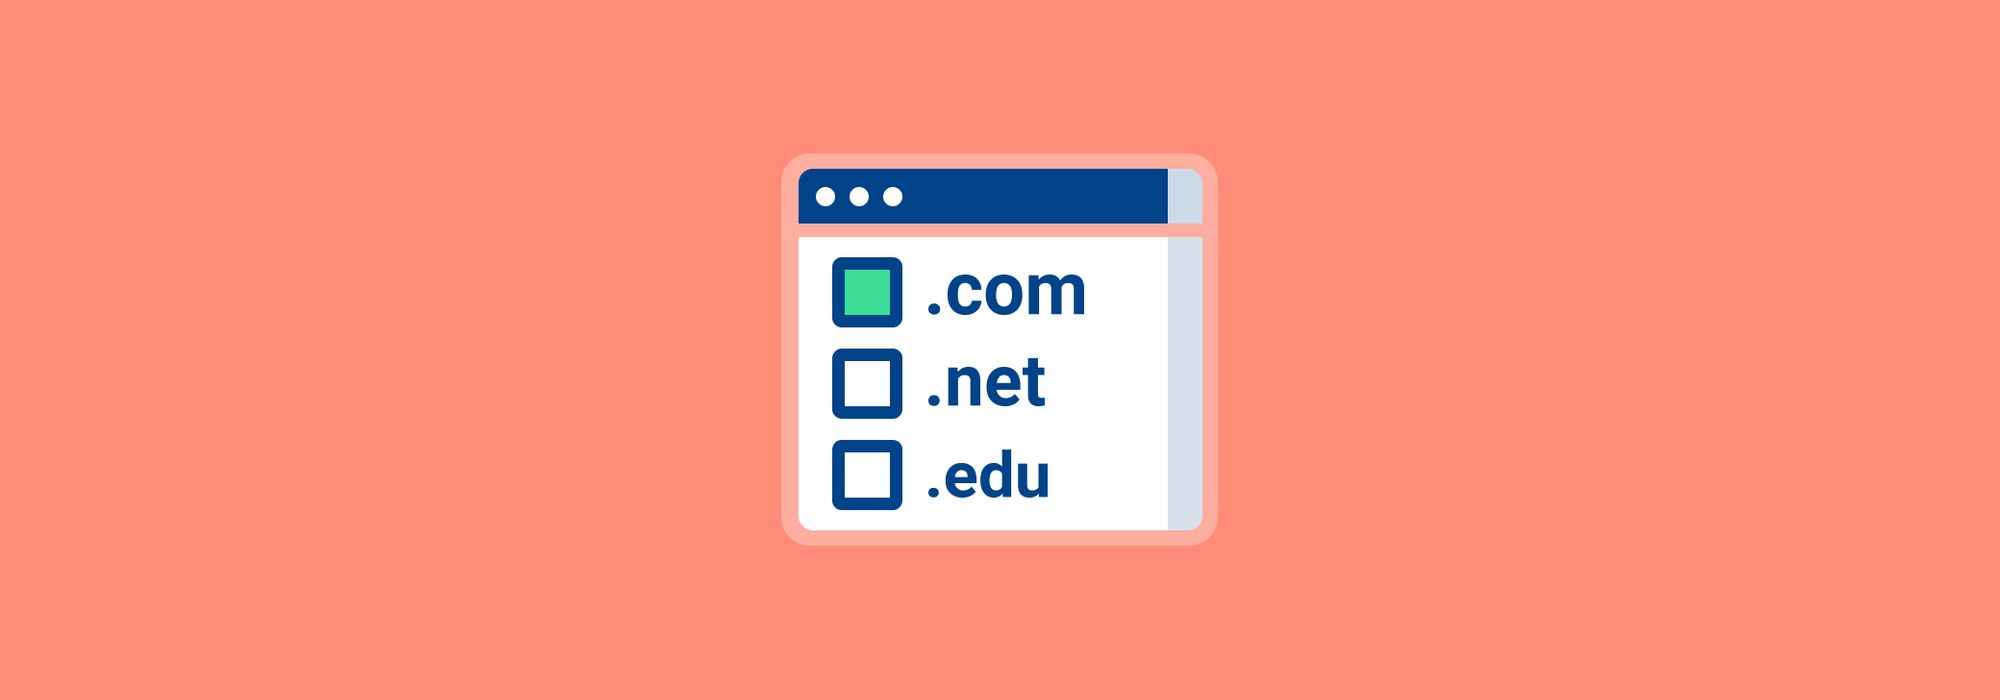 How to Choose and Register with the Best Domain Registrar